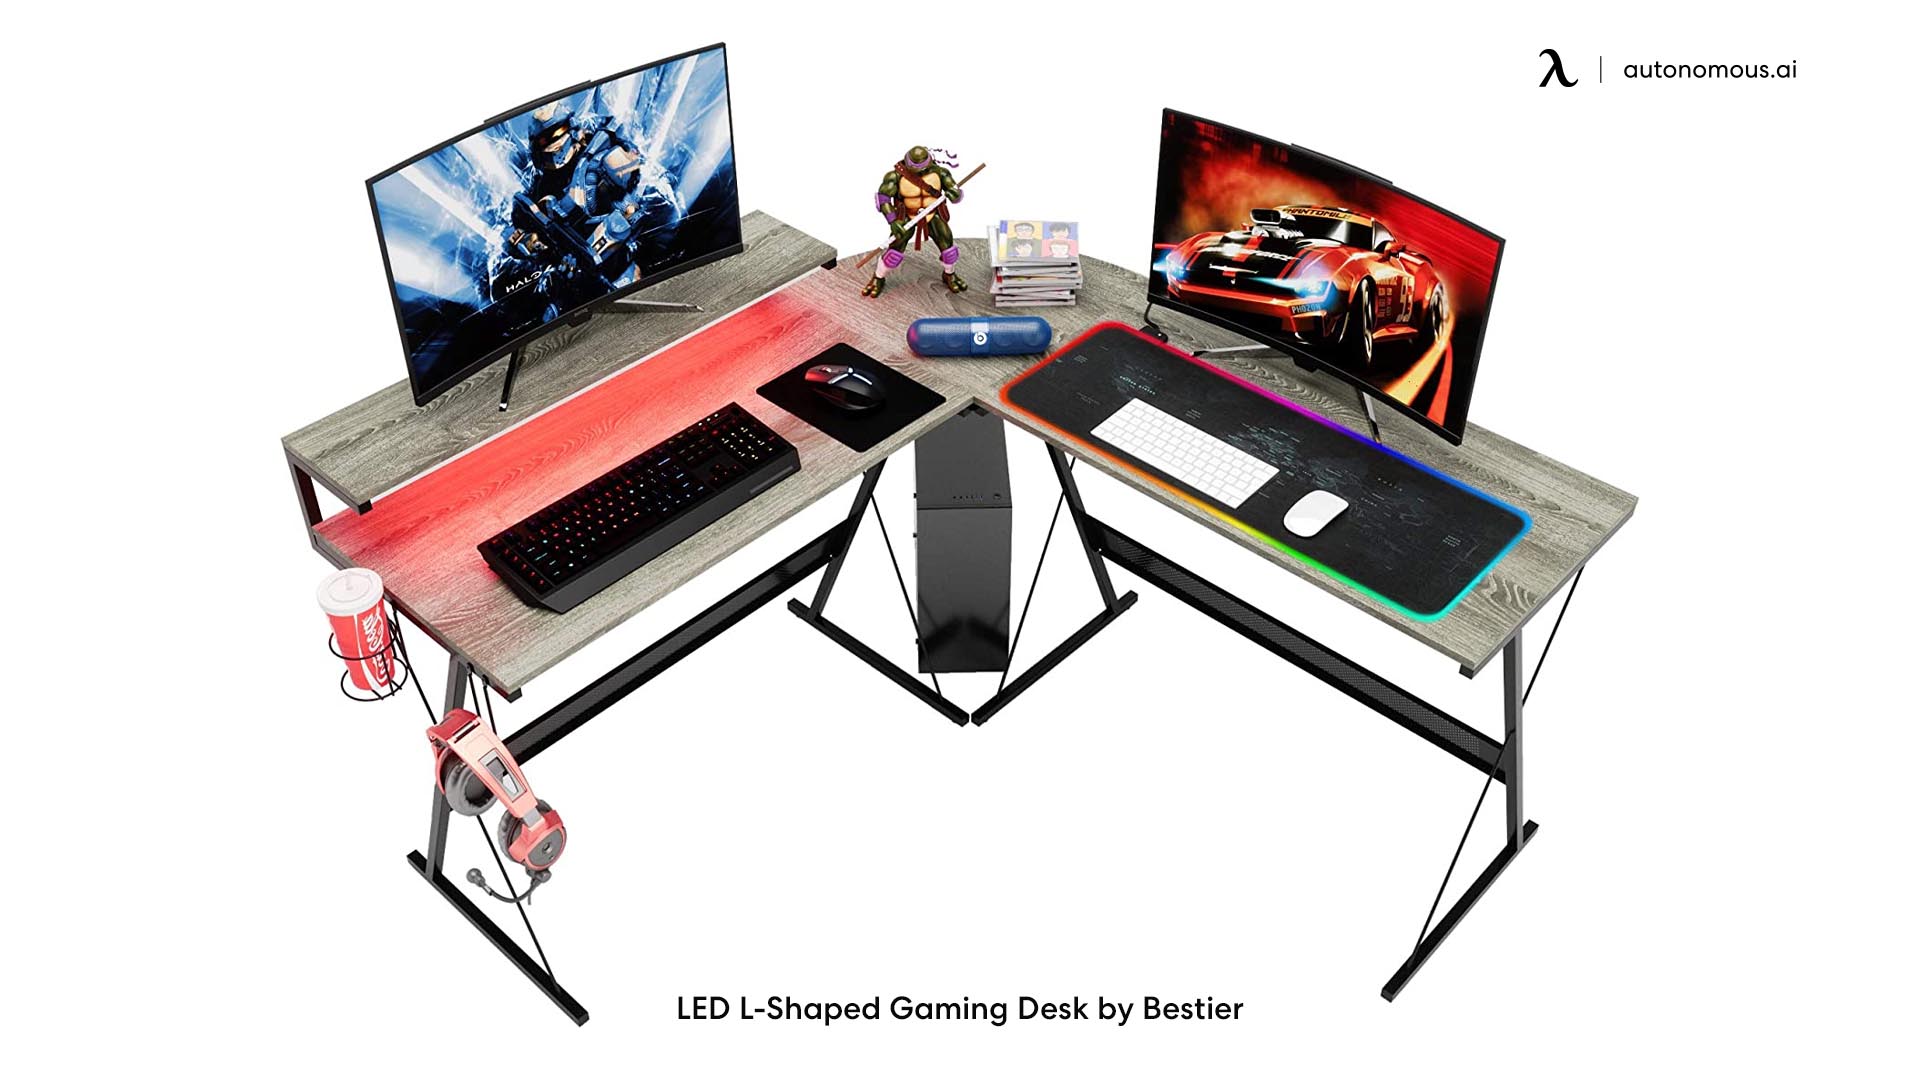 LED L-Shaped Gaming Desk by Bestier